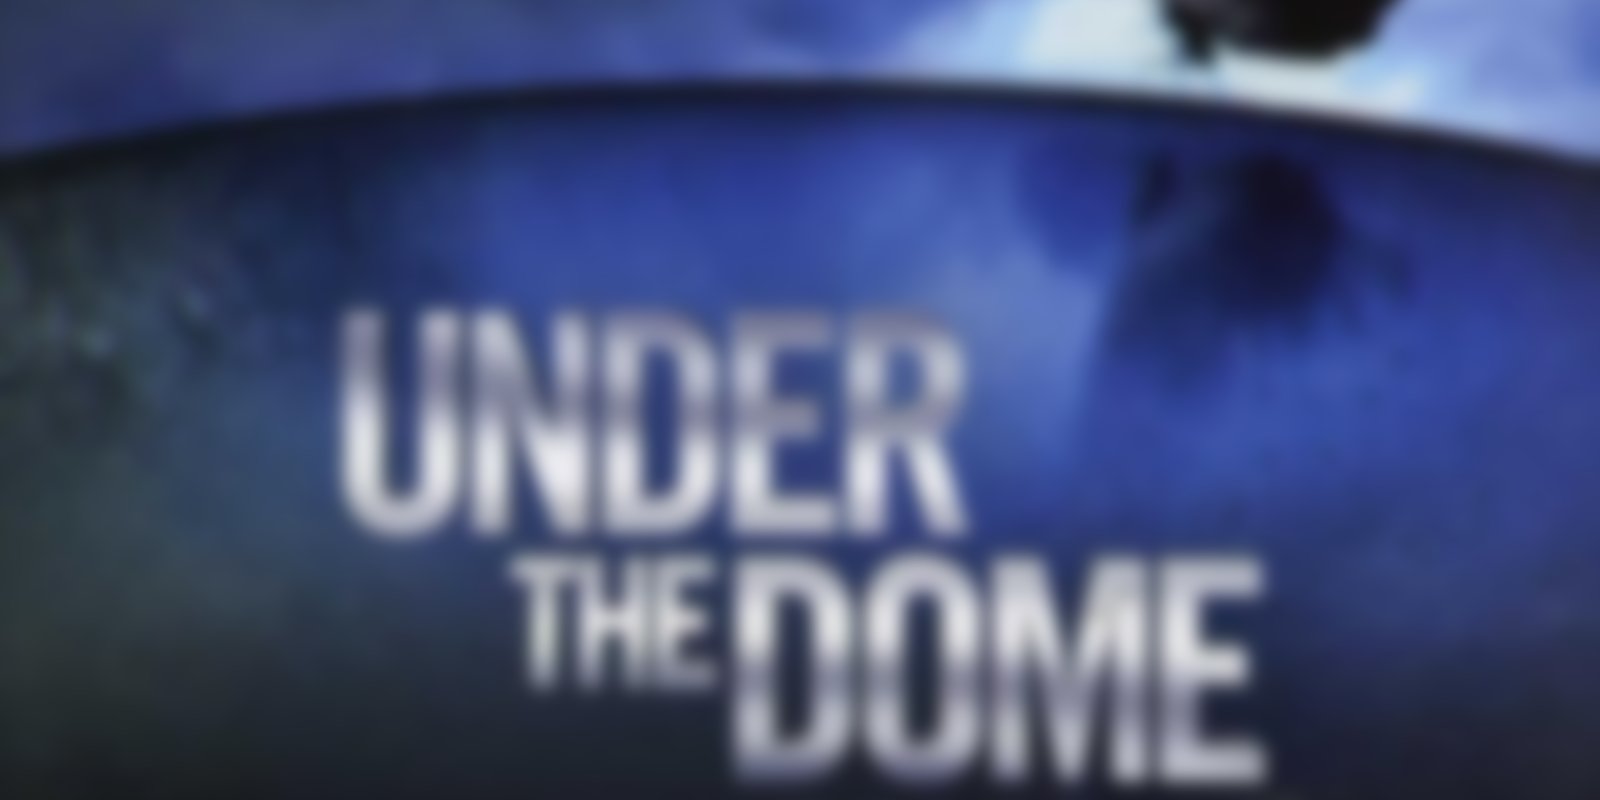 Under the Dome - Staffel 3